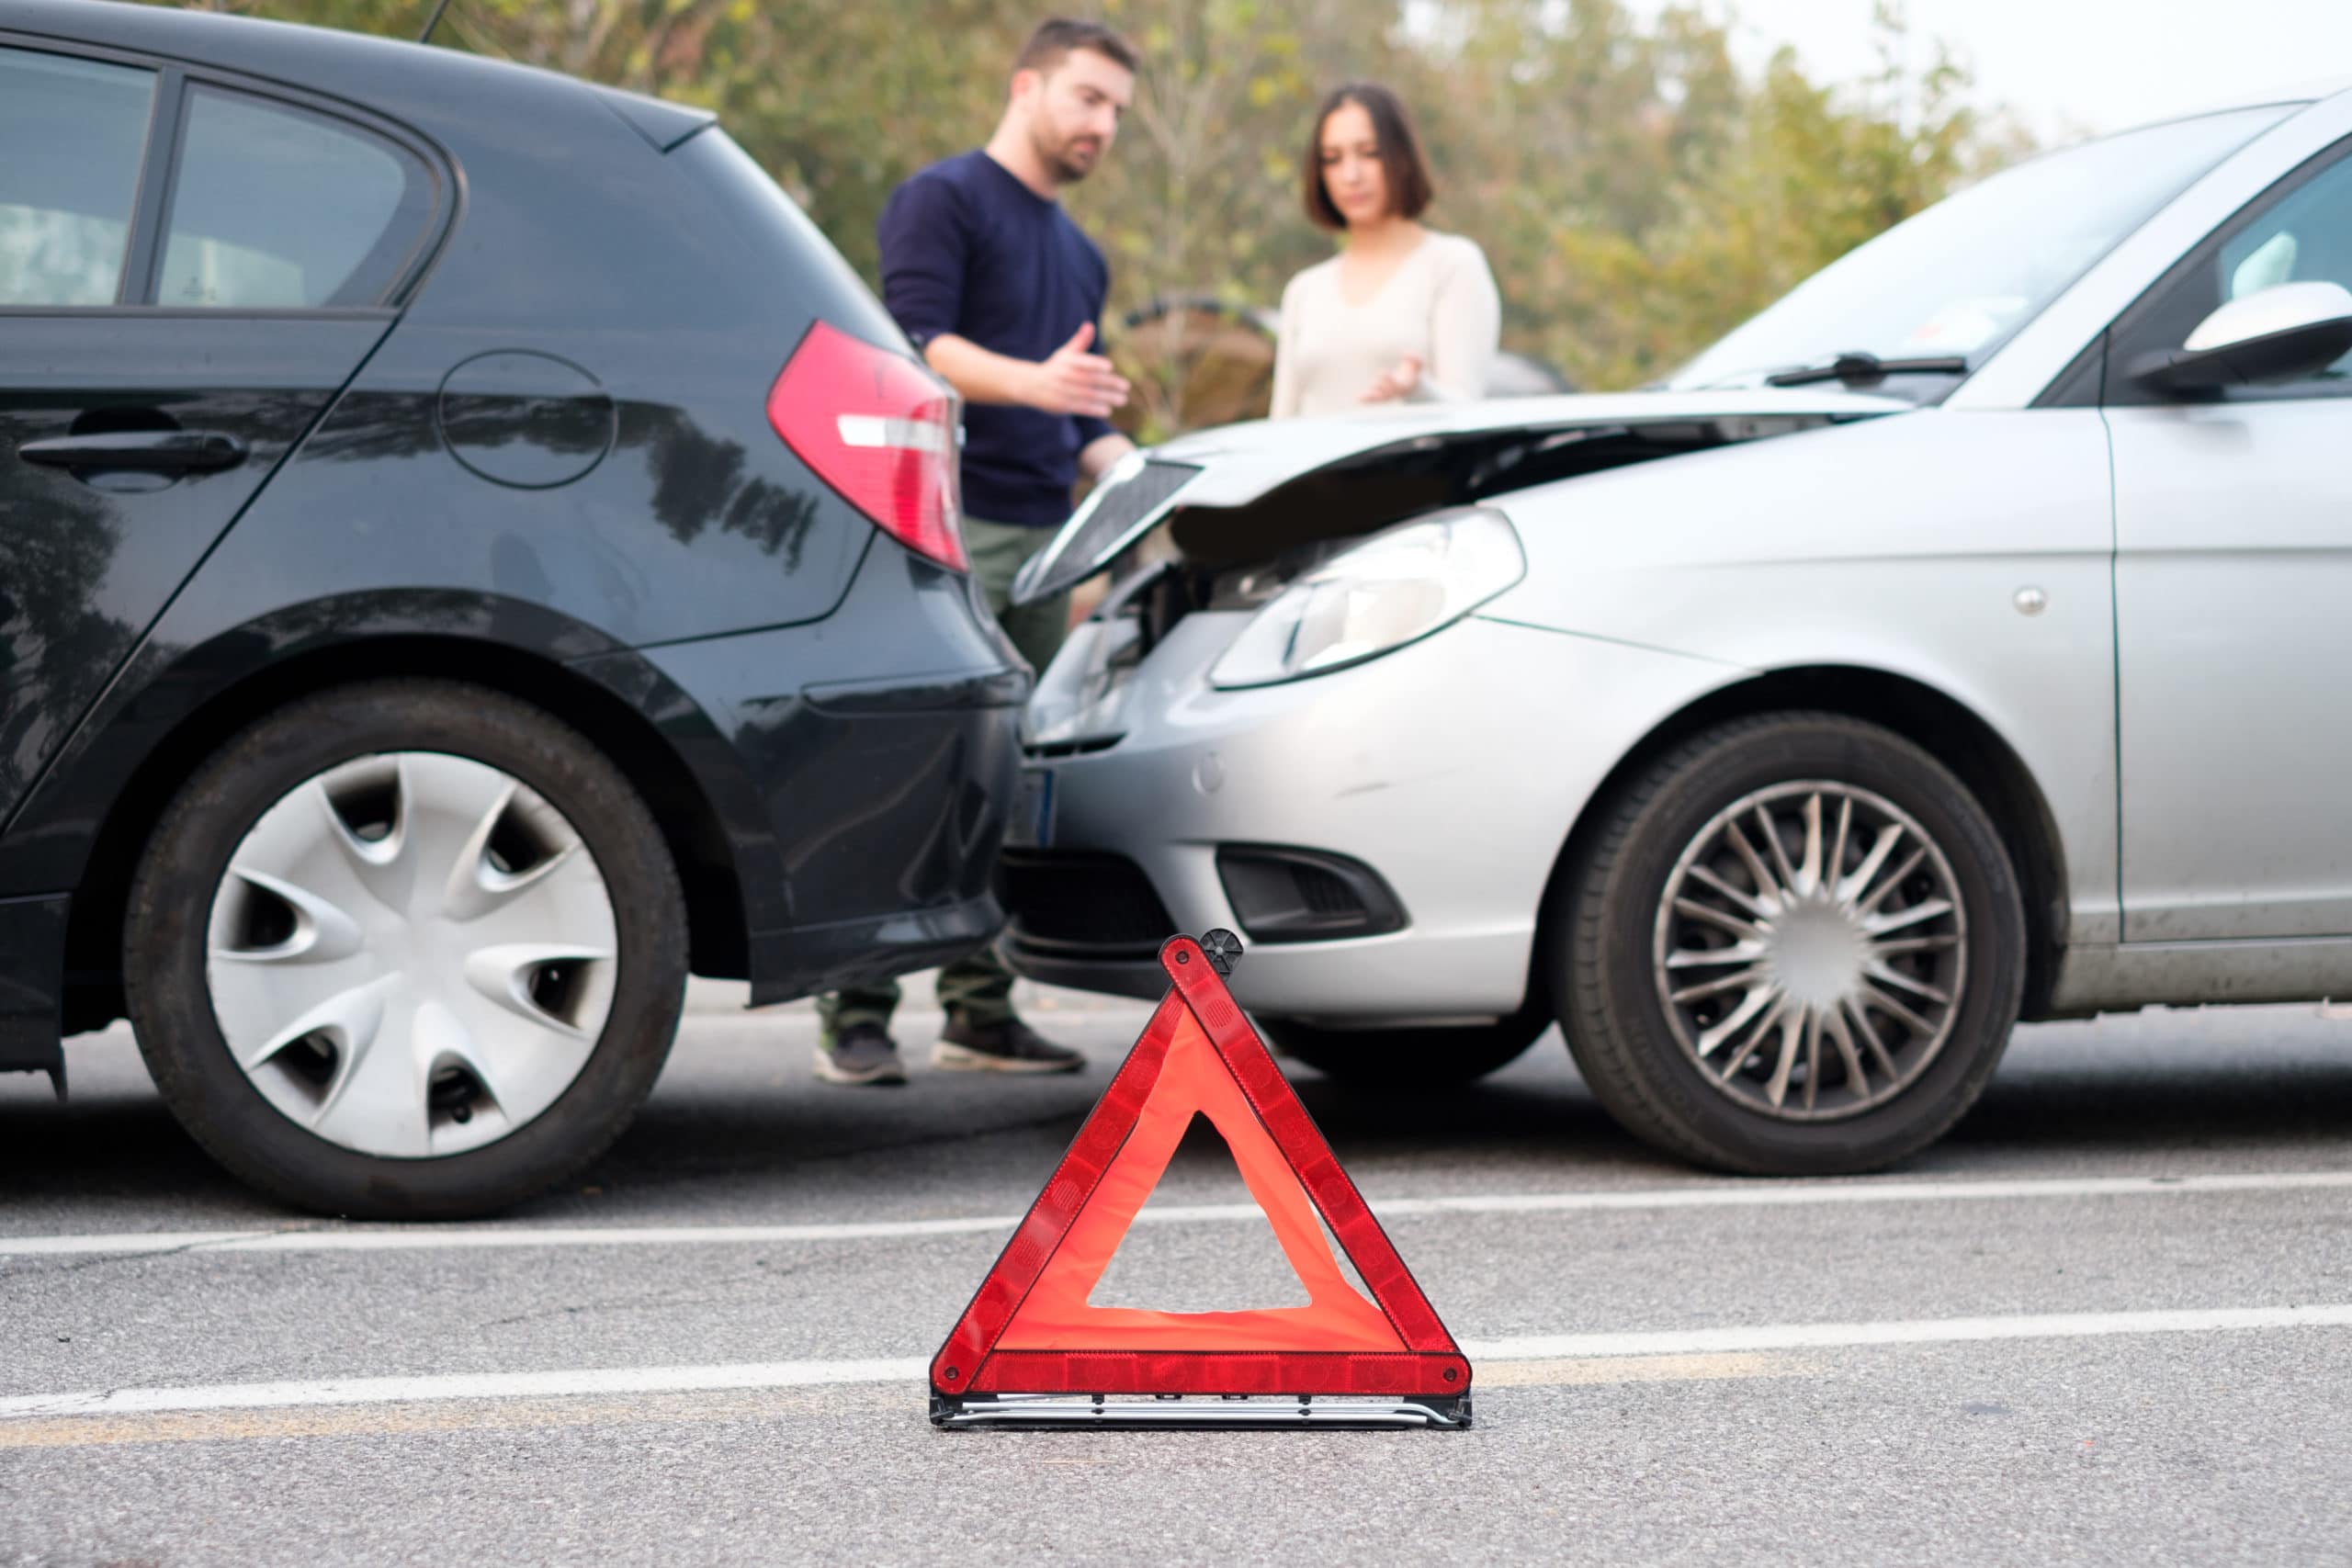 What To Do After an Auto Accident